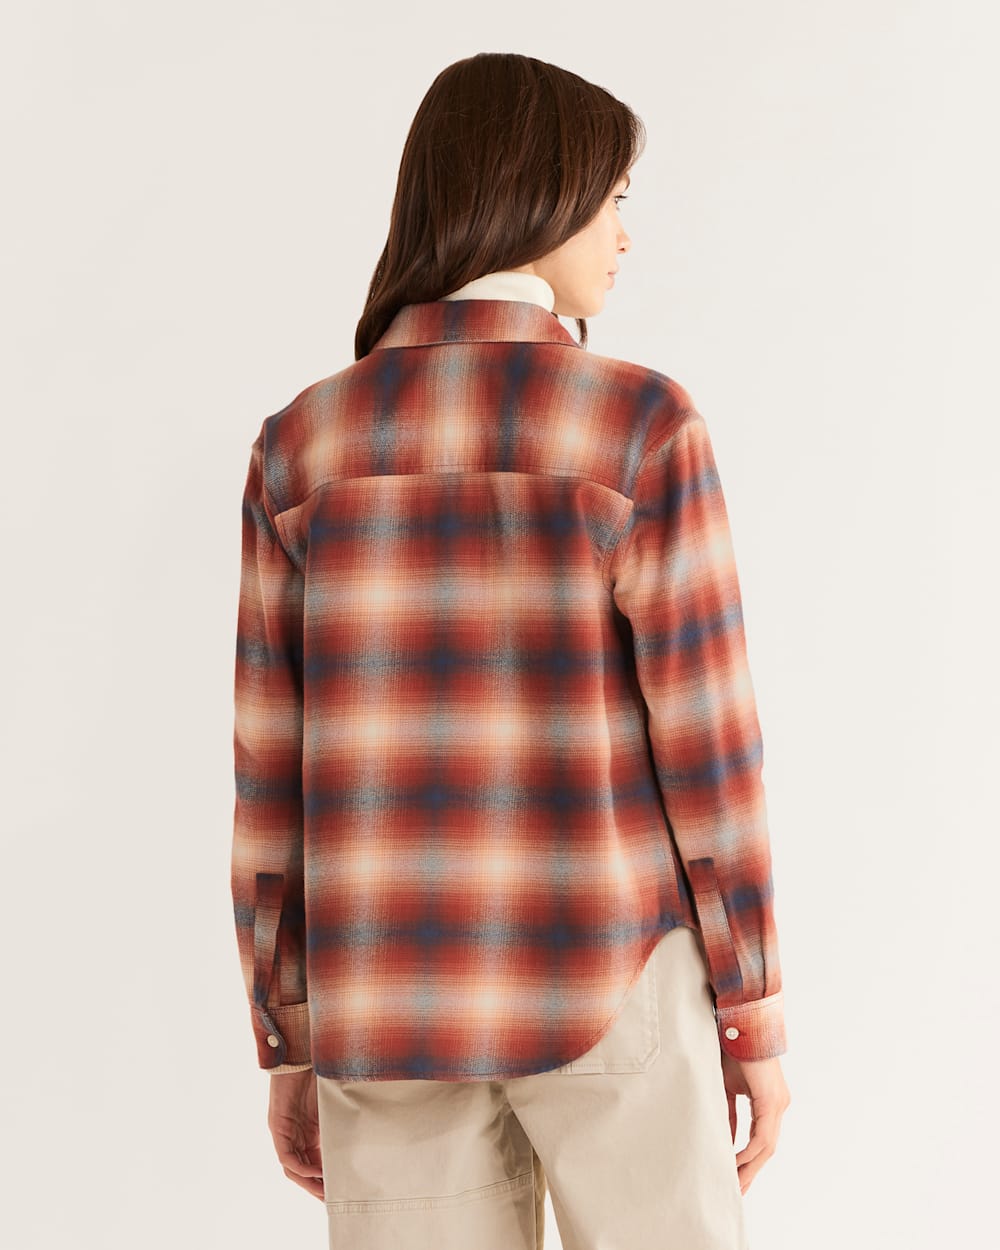 ALTERNATE VIEW OF WOMEN'S BOYFRIEND DOUBLE-BRUSHED FLANNEL SHIRT IN RED OCHRE MULTI PLAID image number 3